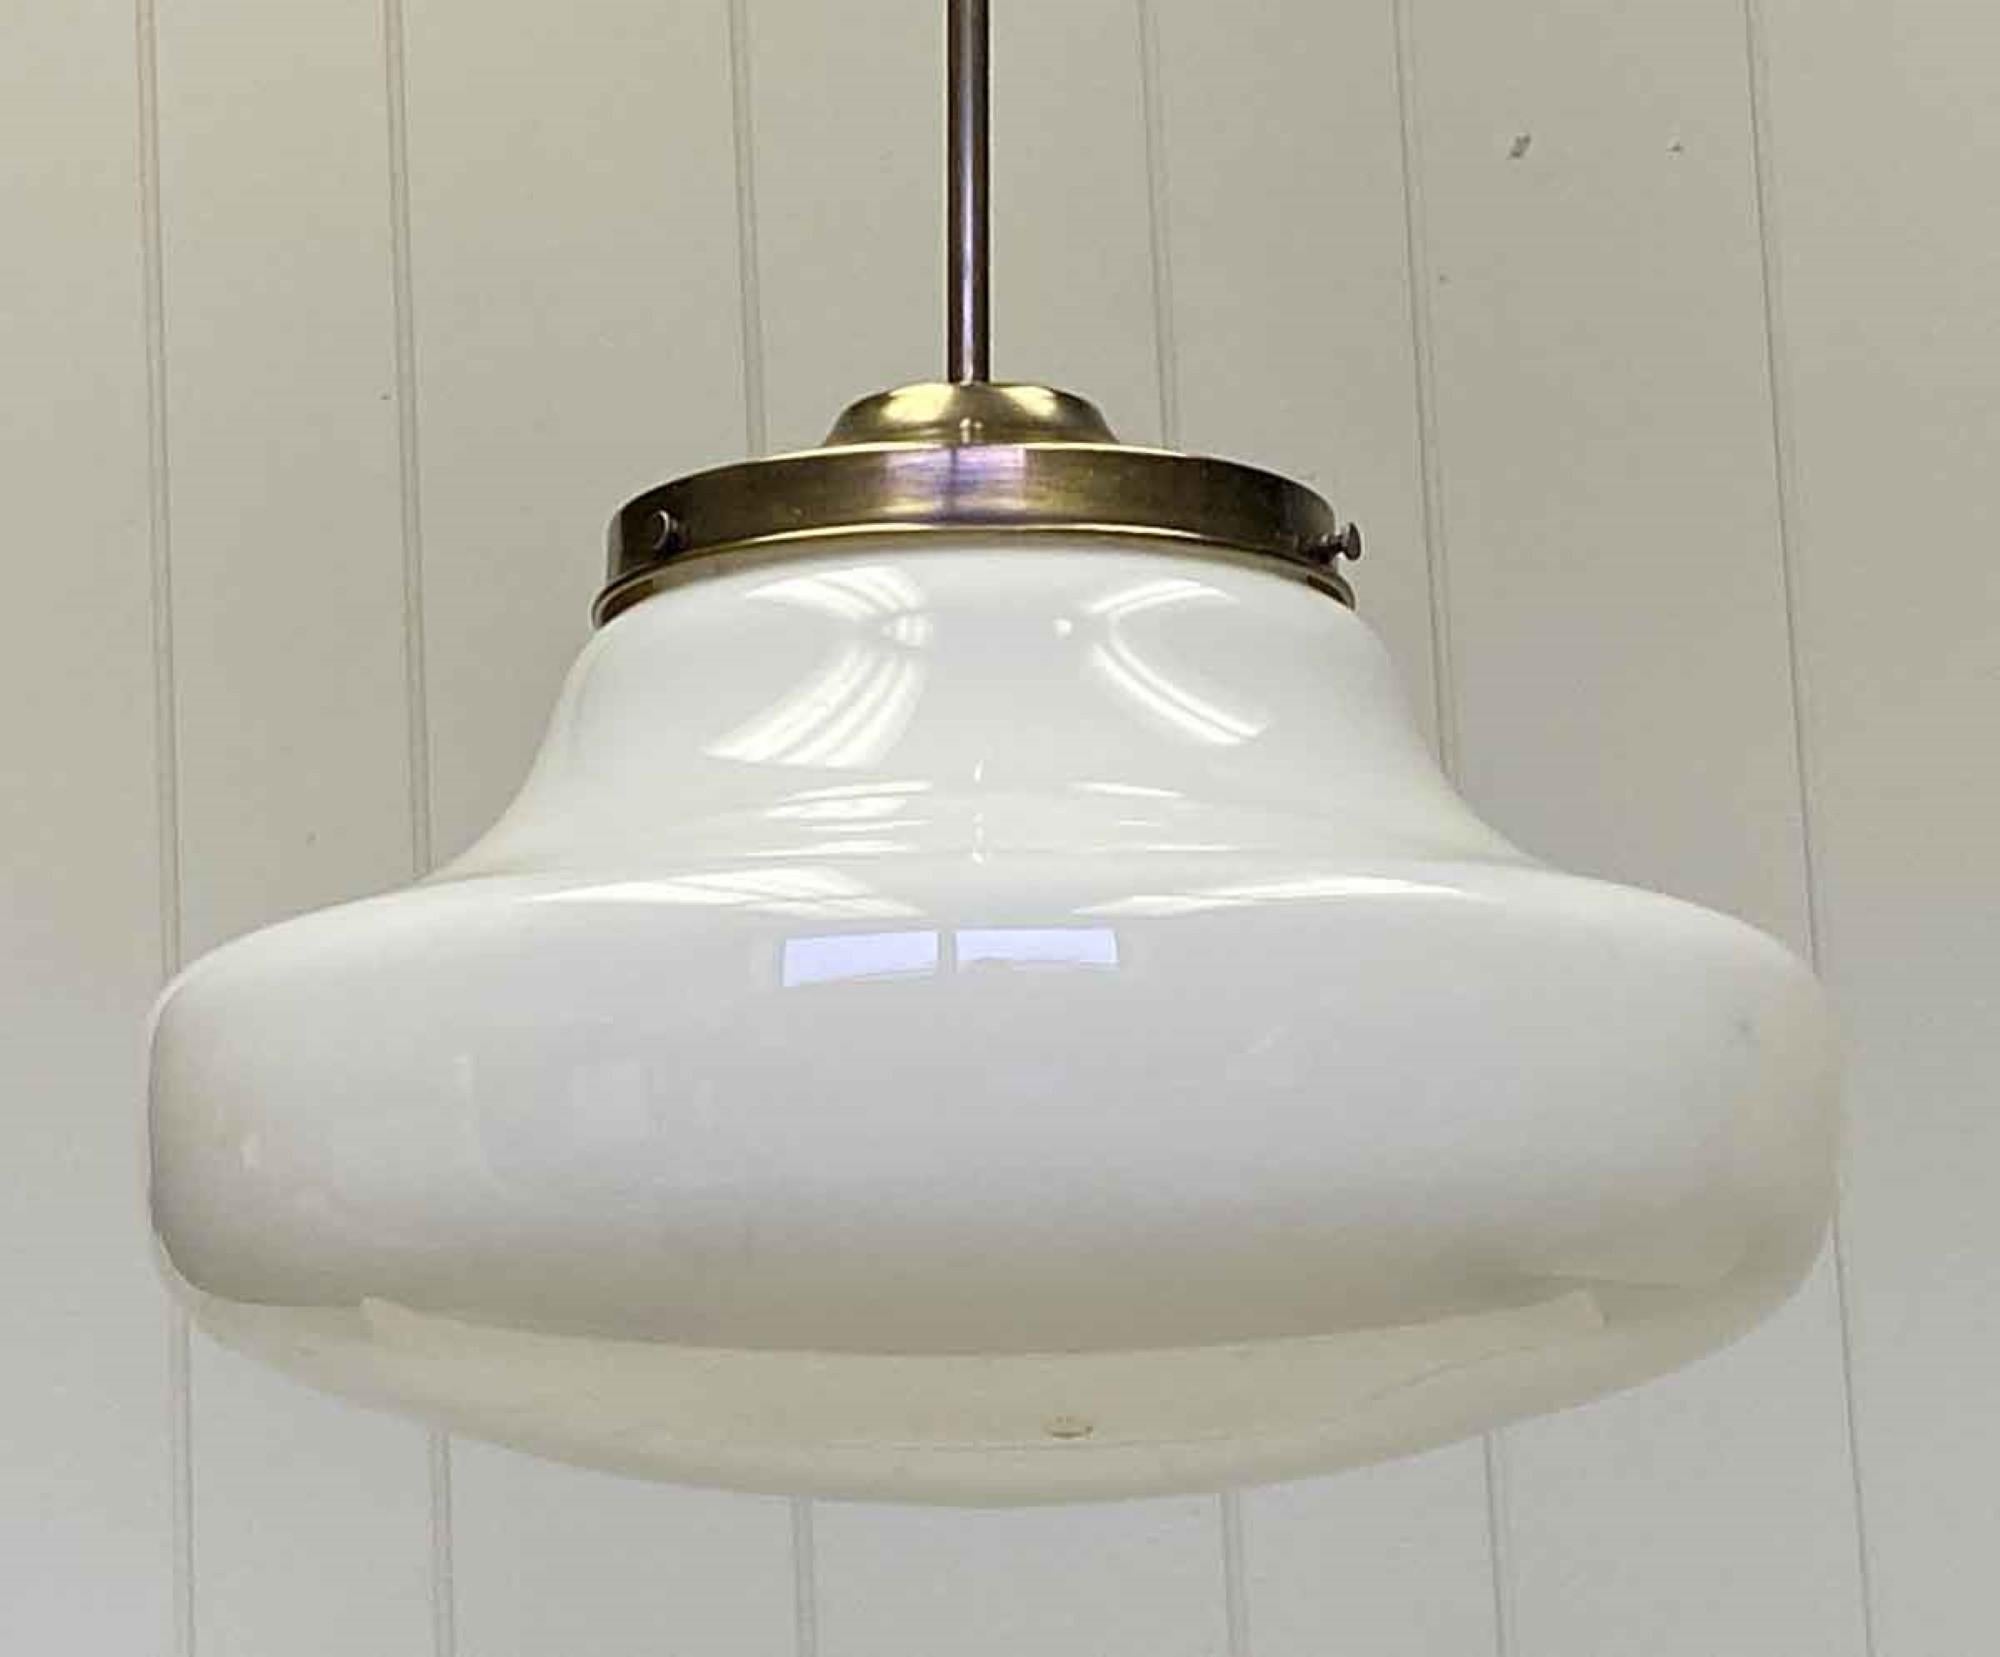 1940s large white milk glass globe fitted with a modern newly made brass pole fitter. Small quantity available at time of posting. Priced each. Please inquire. Please note, this item is located in our Scranton, PA location.